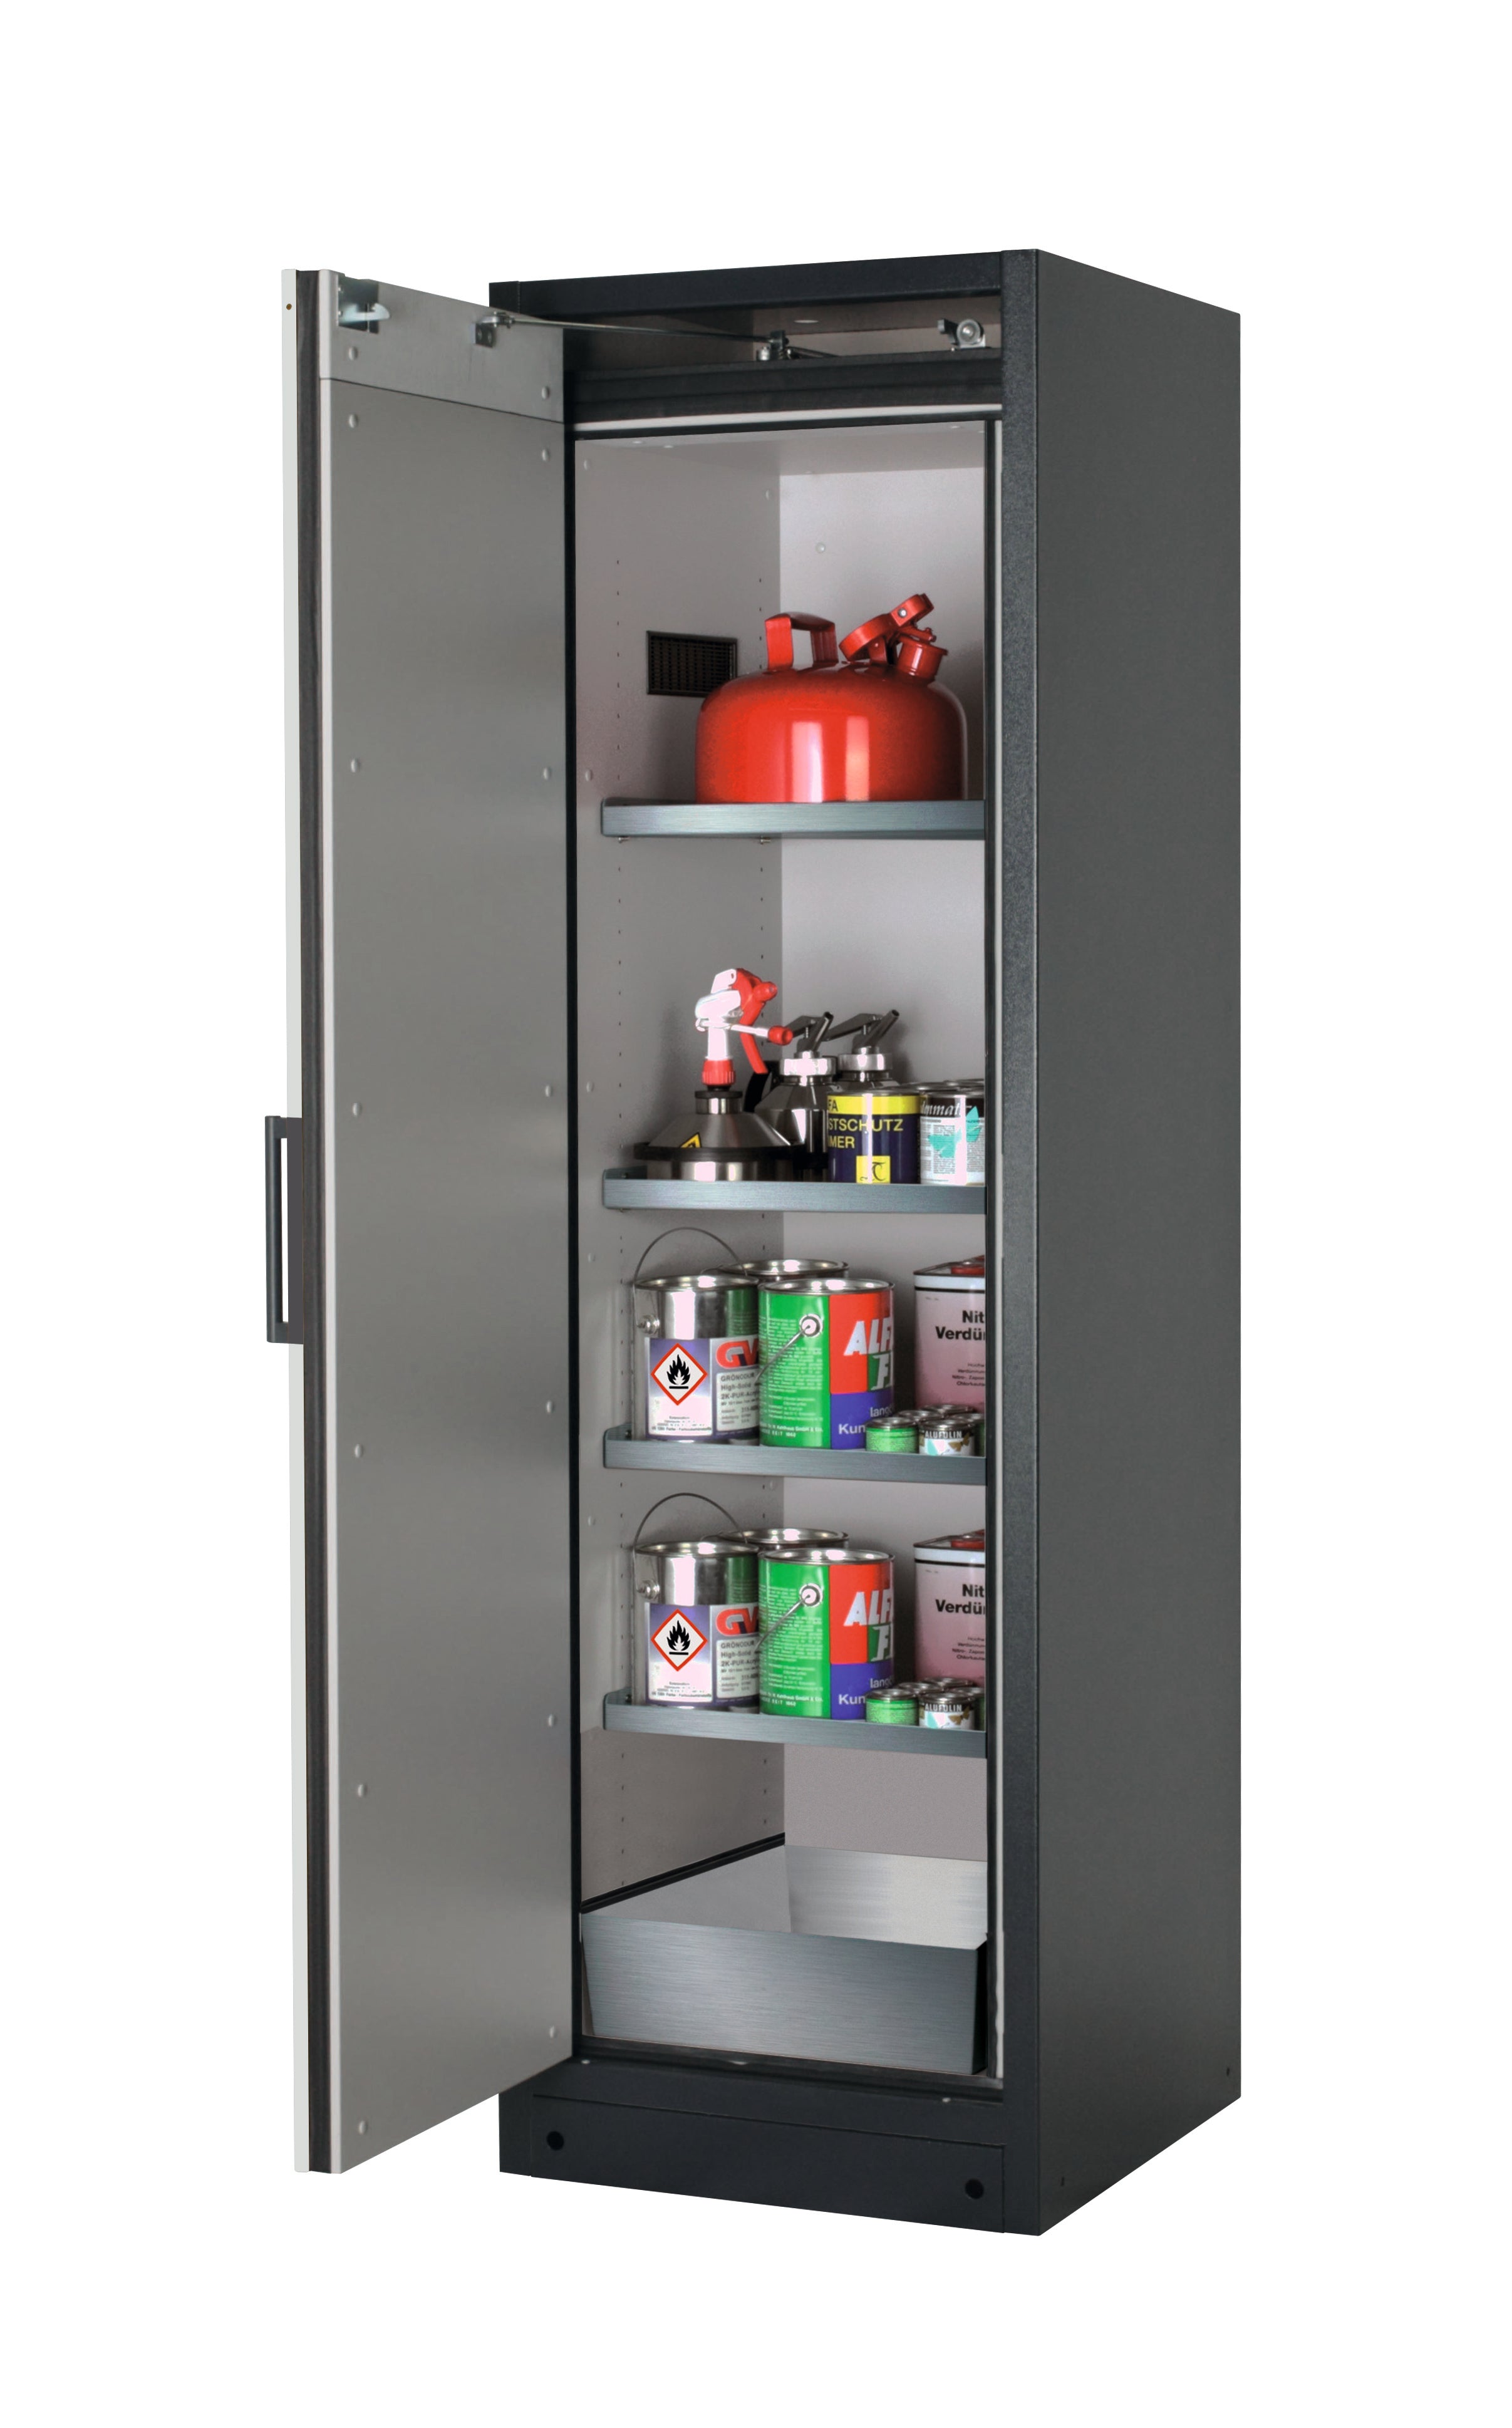 Type 90 safety storage cabinet Q-CLASSIC-90 model Q90.195.060 in light grey RAL 7035 with 4x shelf standard (stainless steel 1.4301),